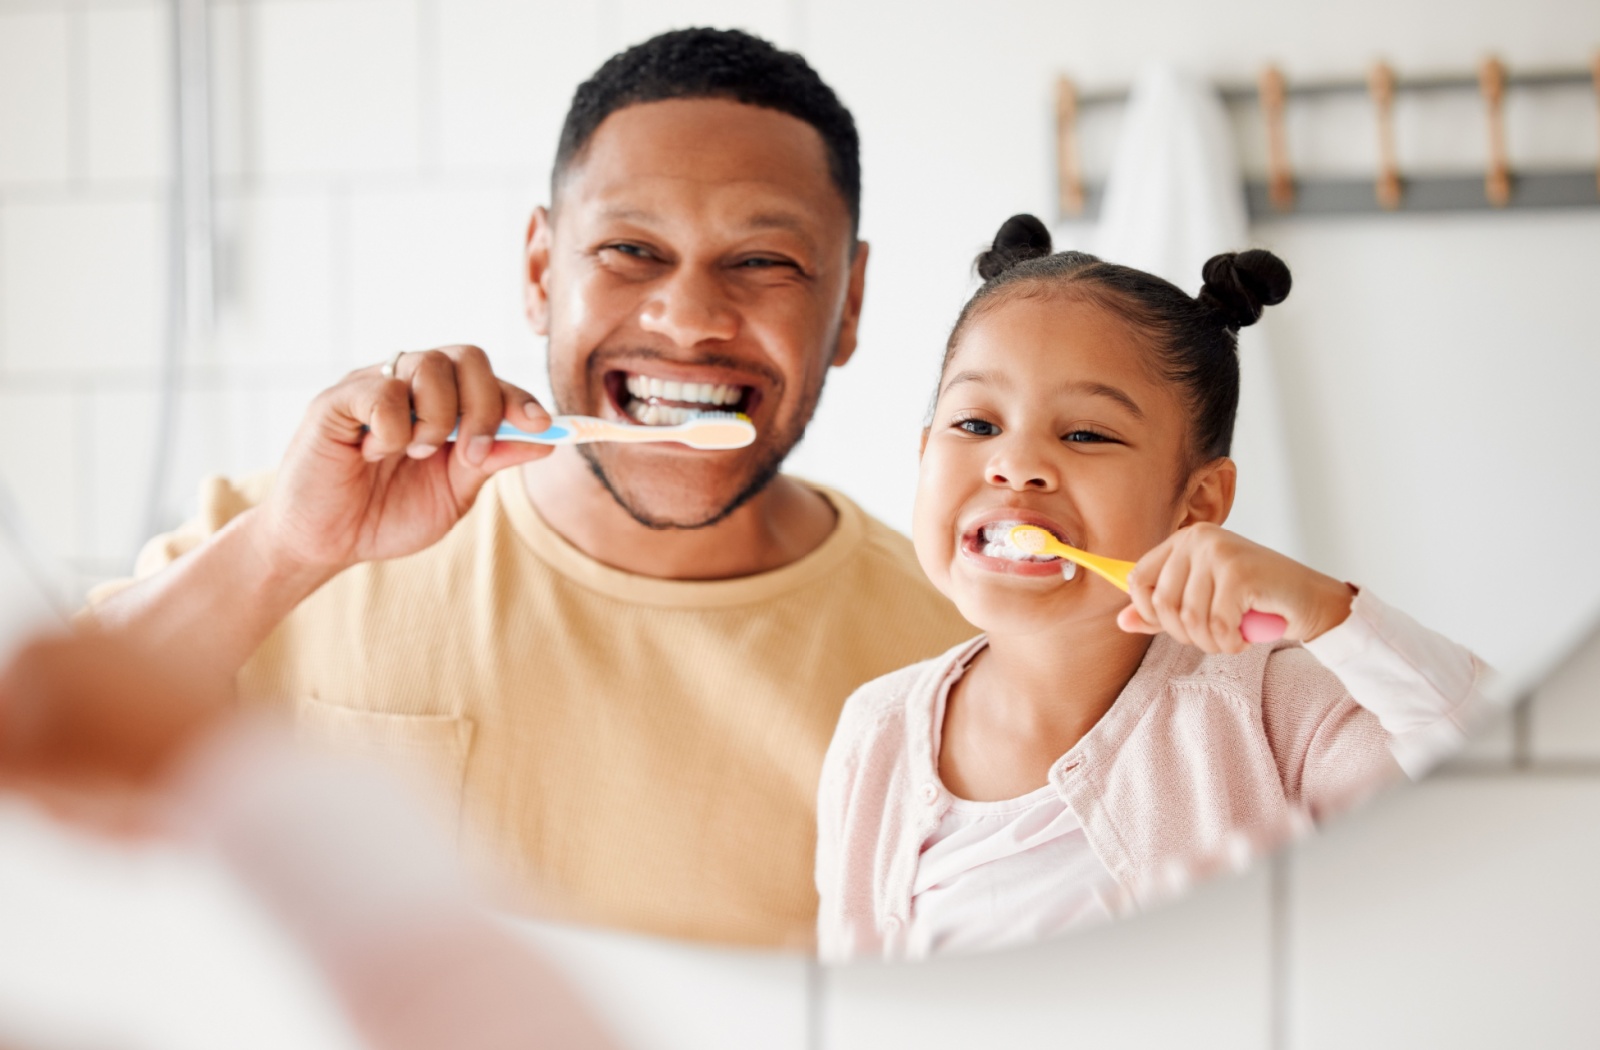 A parent and child brush their teeth together, modelling good oral hygiene habits.